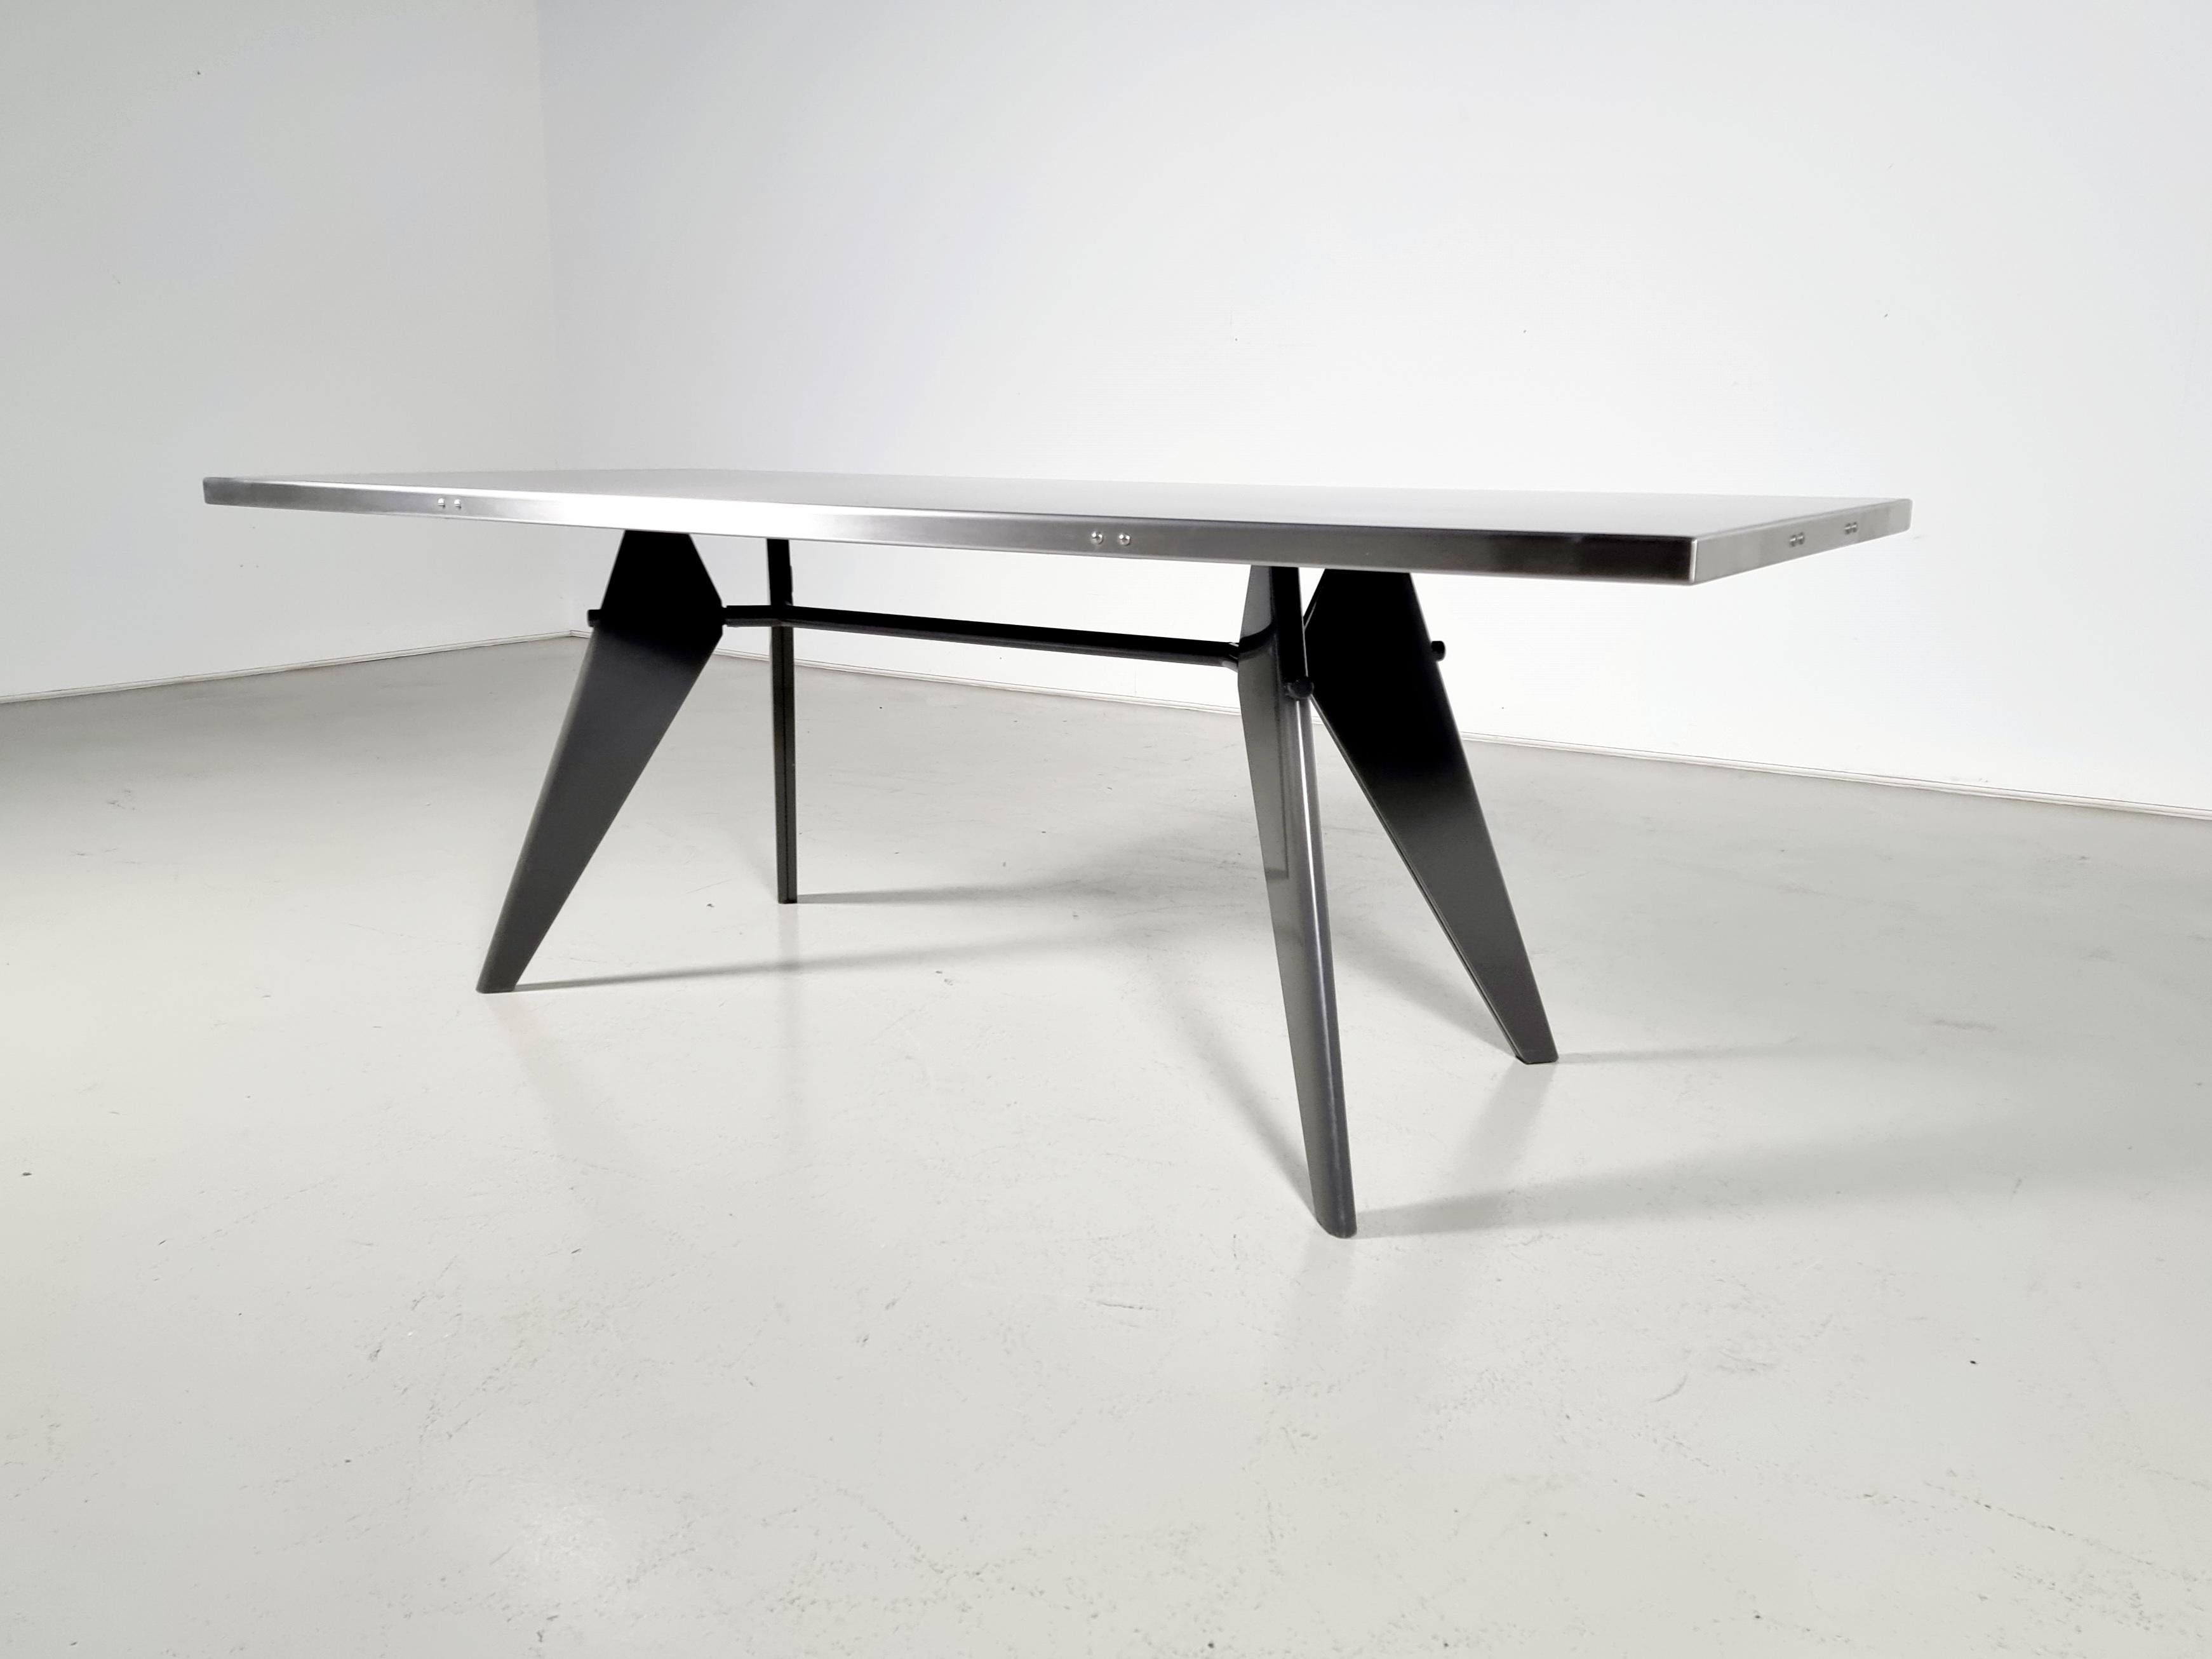 Jean Prouve by G-Star Raw for Vitra S.A.M. Tropique Table with matching chairs For Sale 2